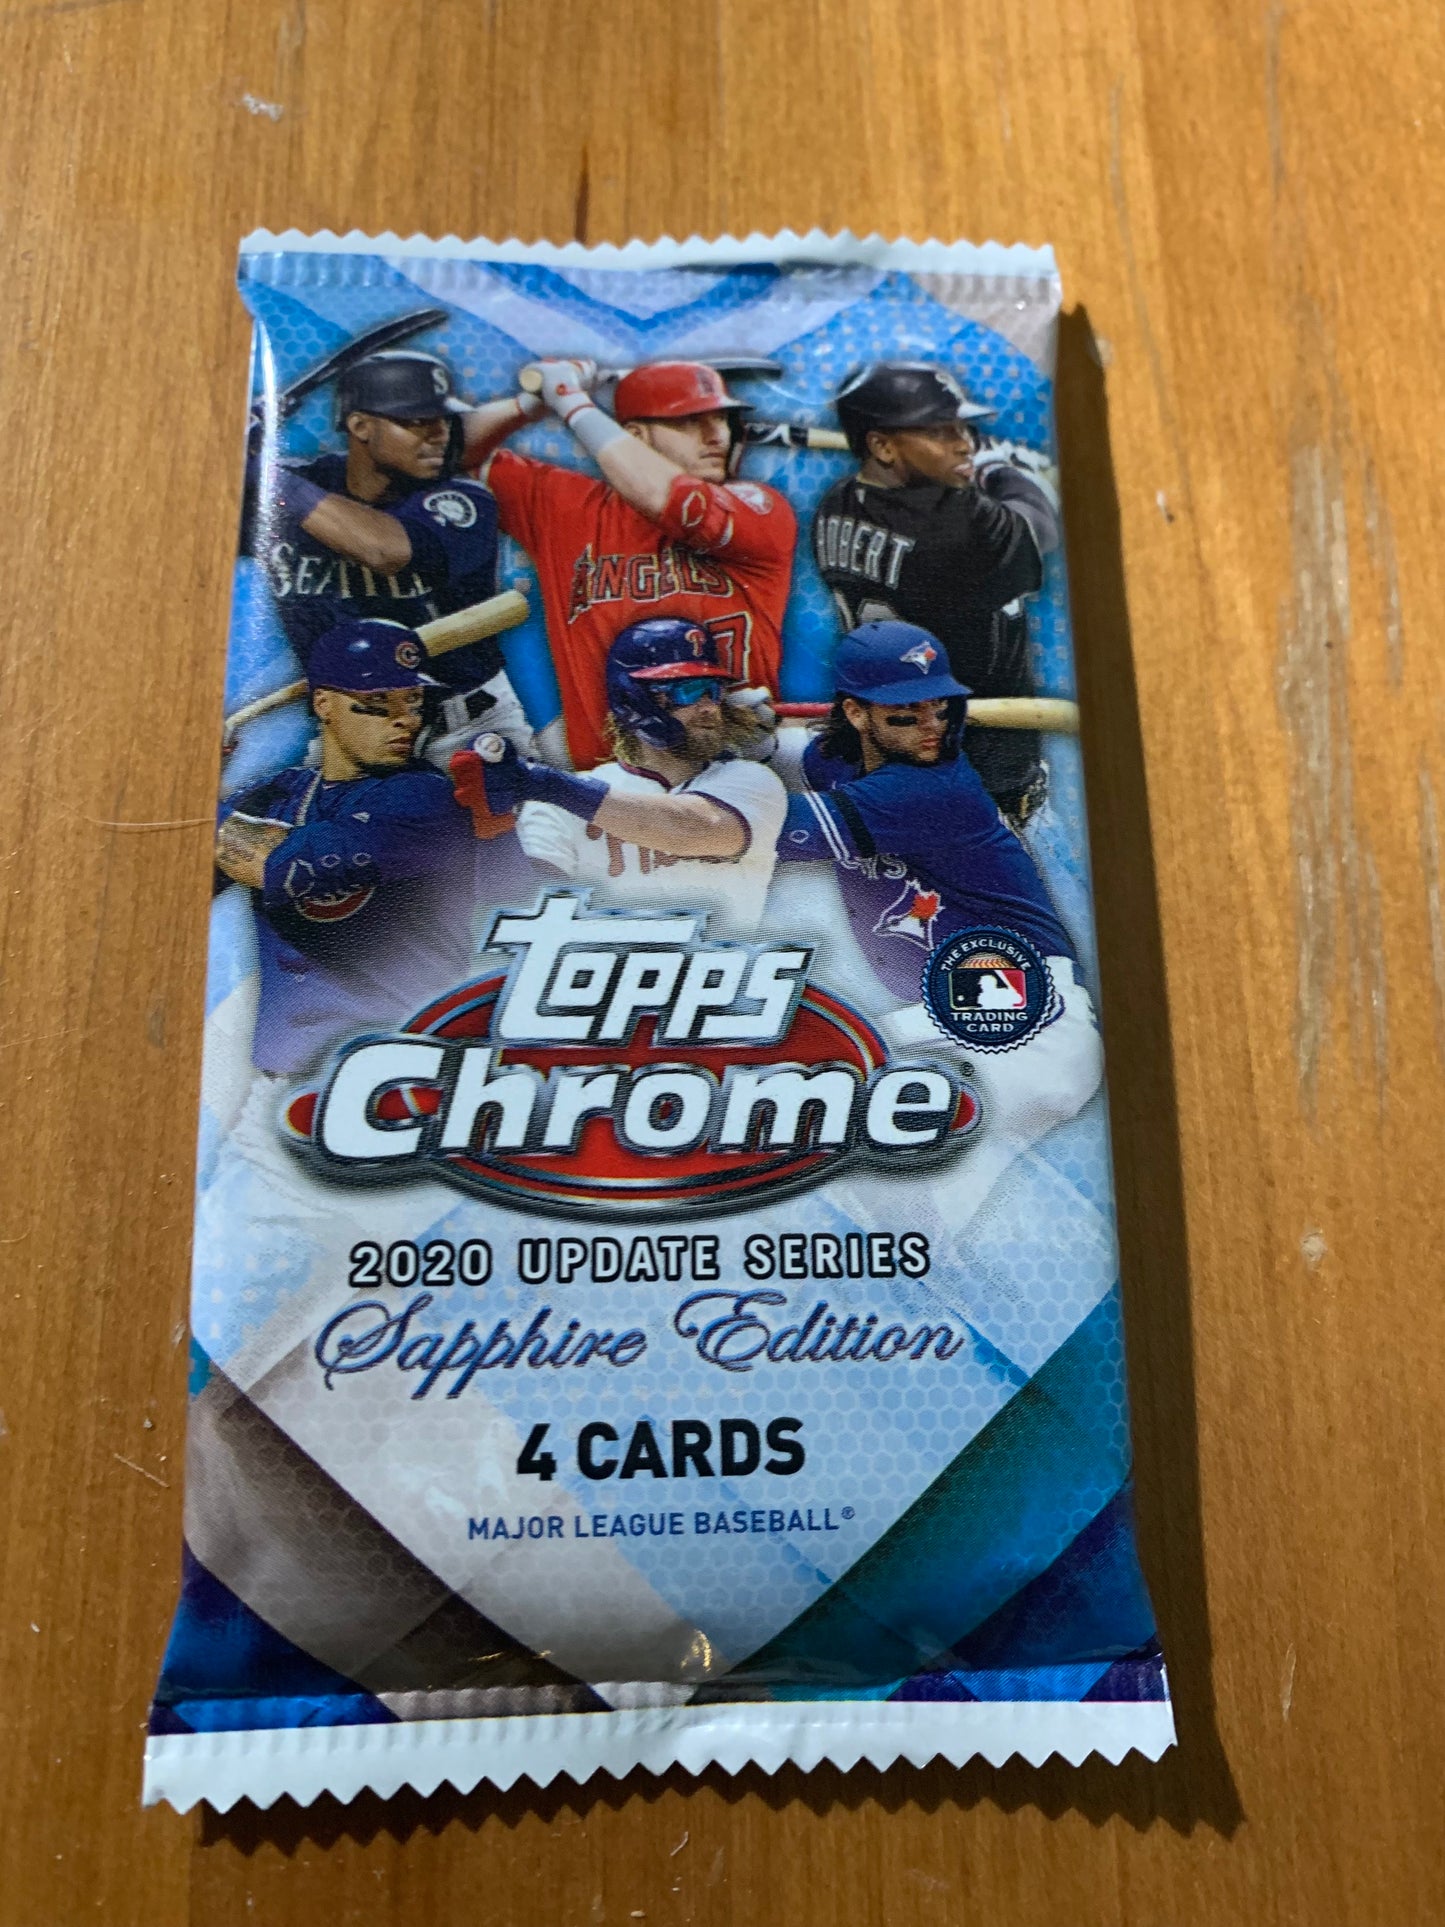 2020 Topps Chrome Updated Sapphire Edition Single Pack for Sale